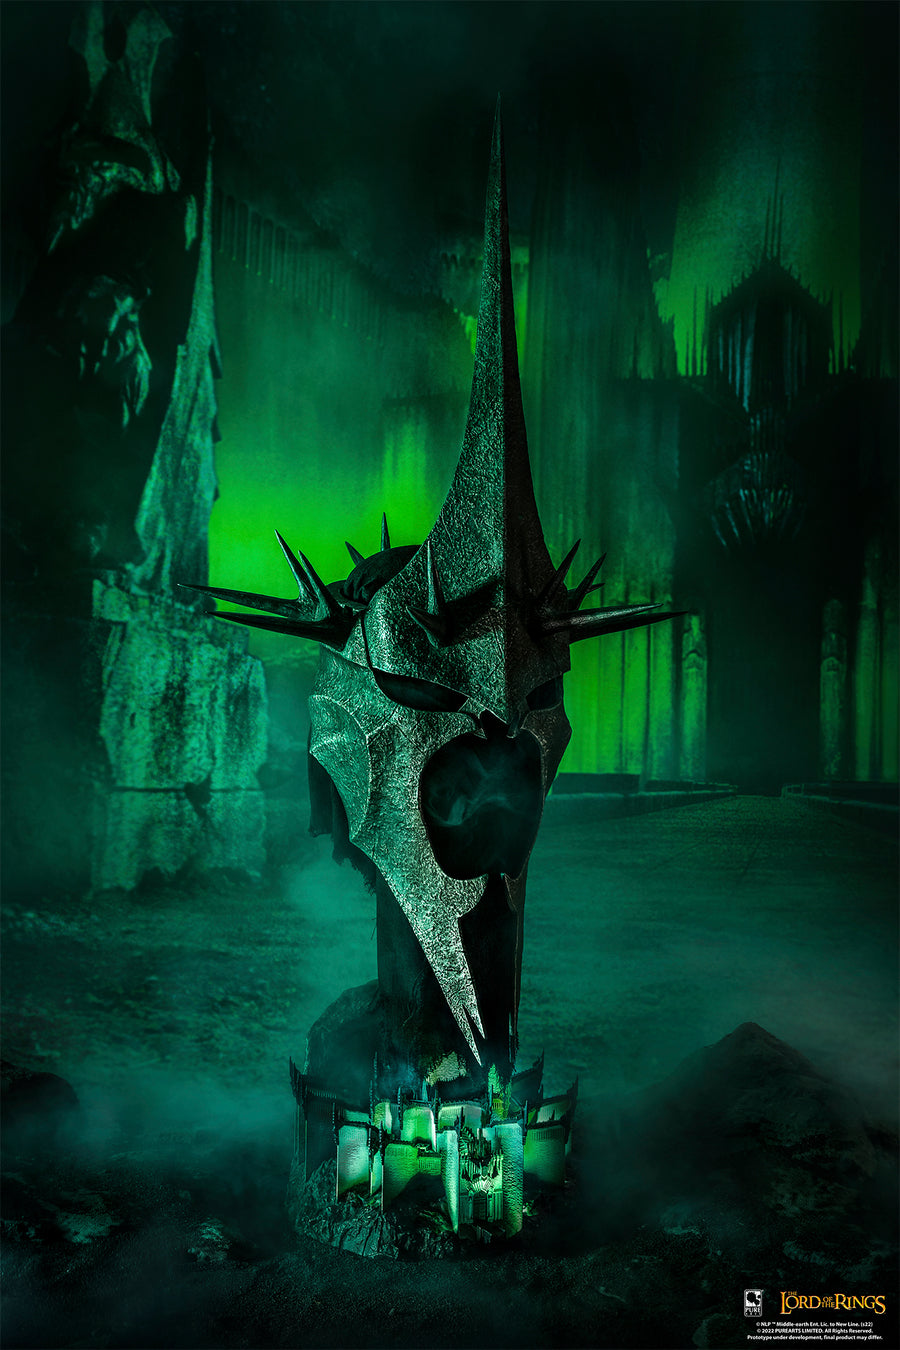 Lord of the Rings Witch-King Art Mask Nazgul Bust with Minas Morgul Base  Exclusive Edition! – PureArts